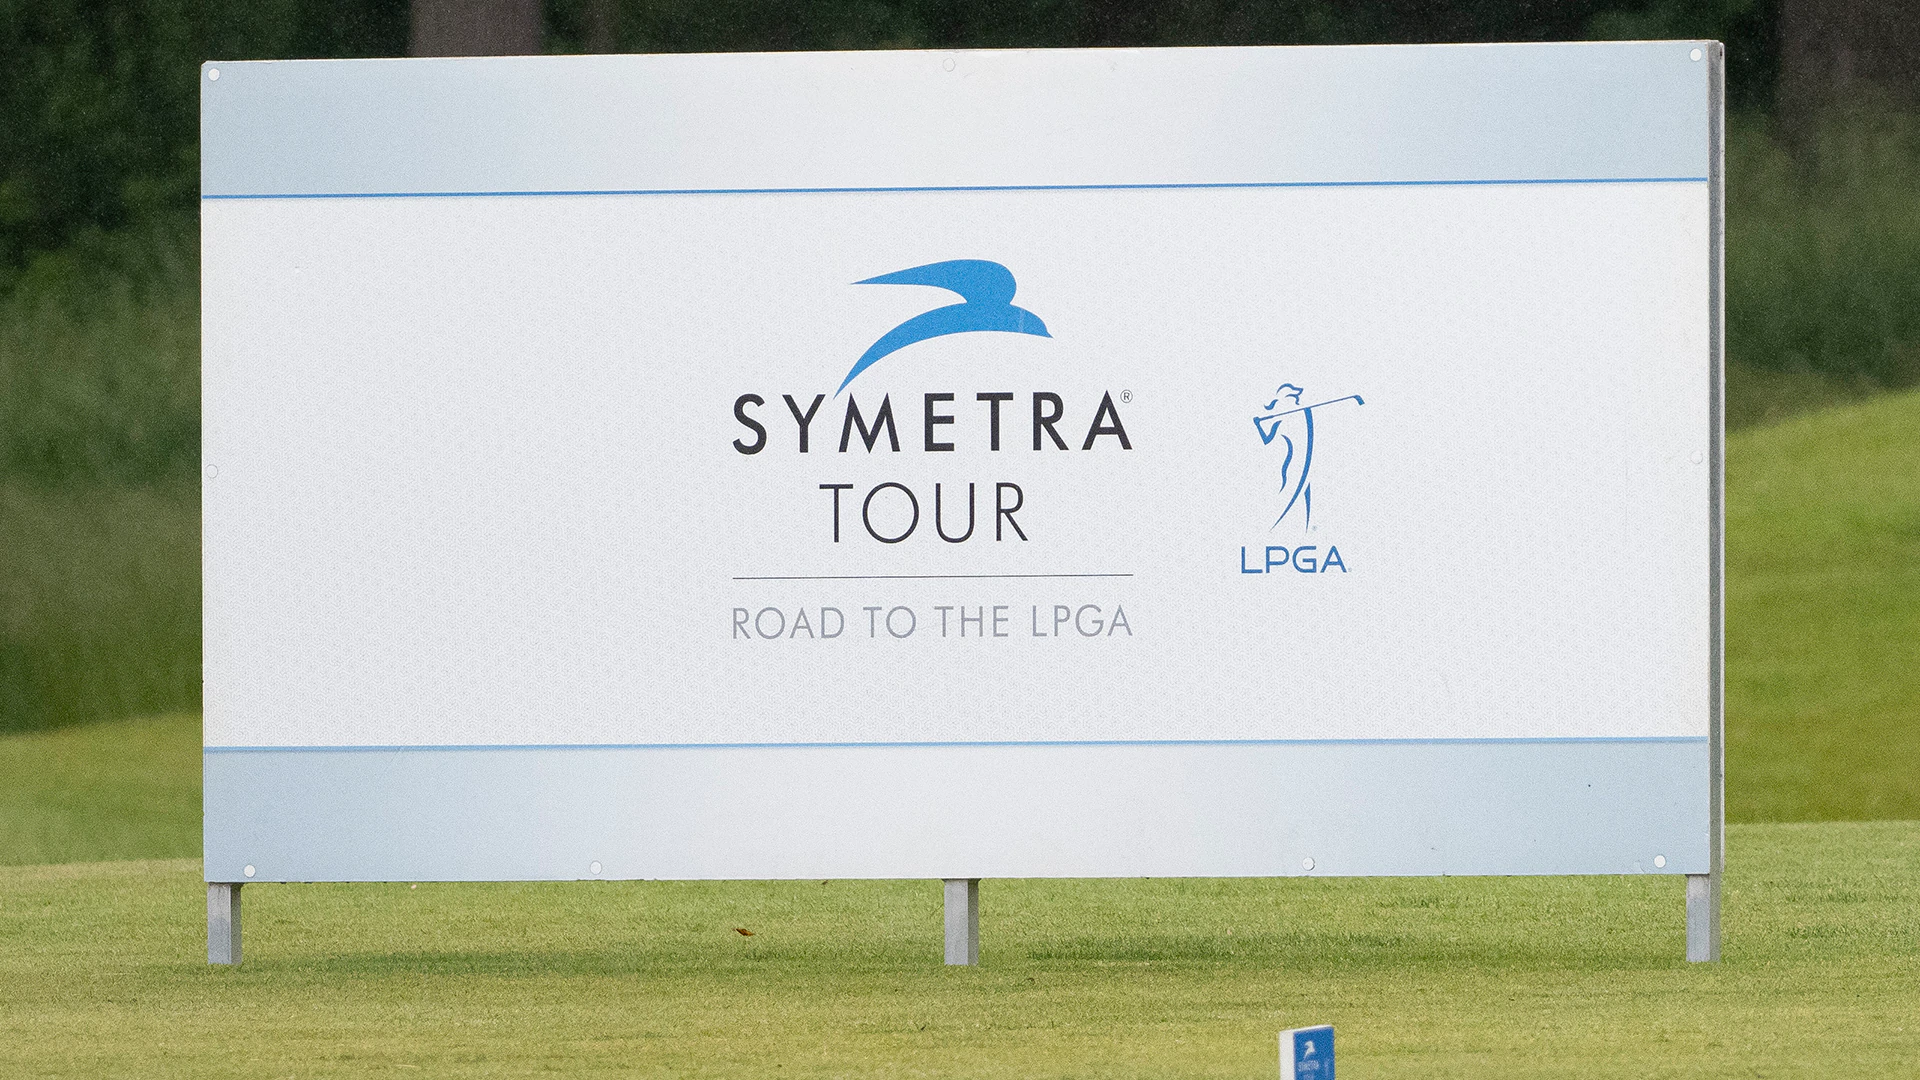 Symetra Tour announces revised schedule with late July restart